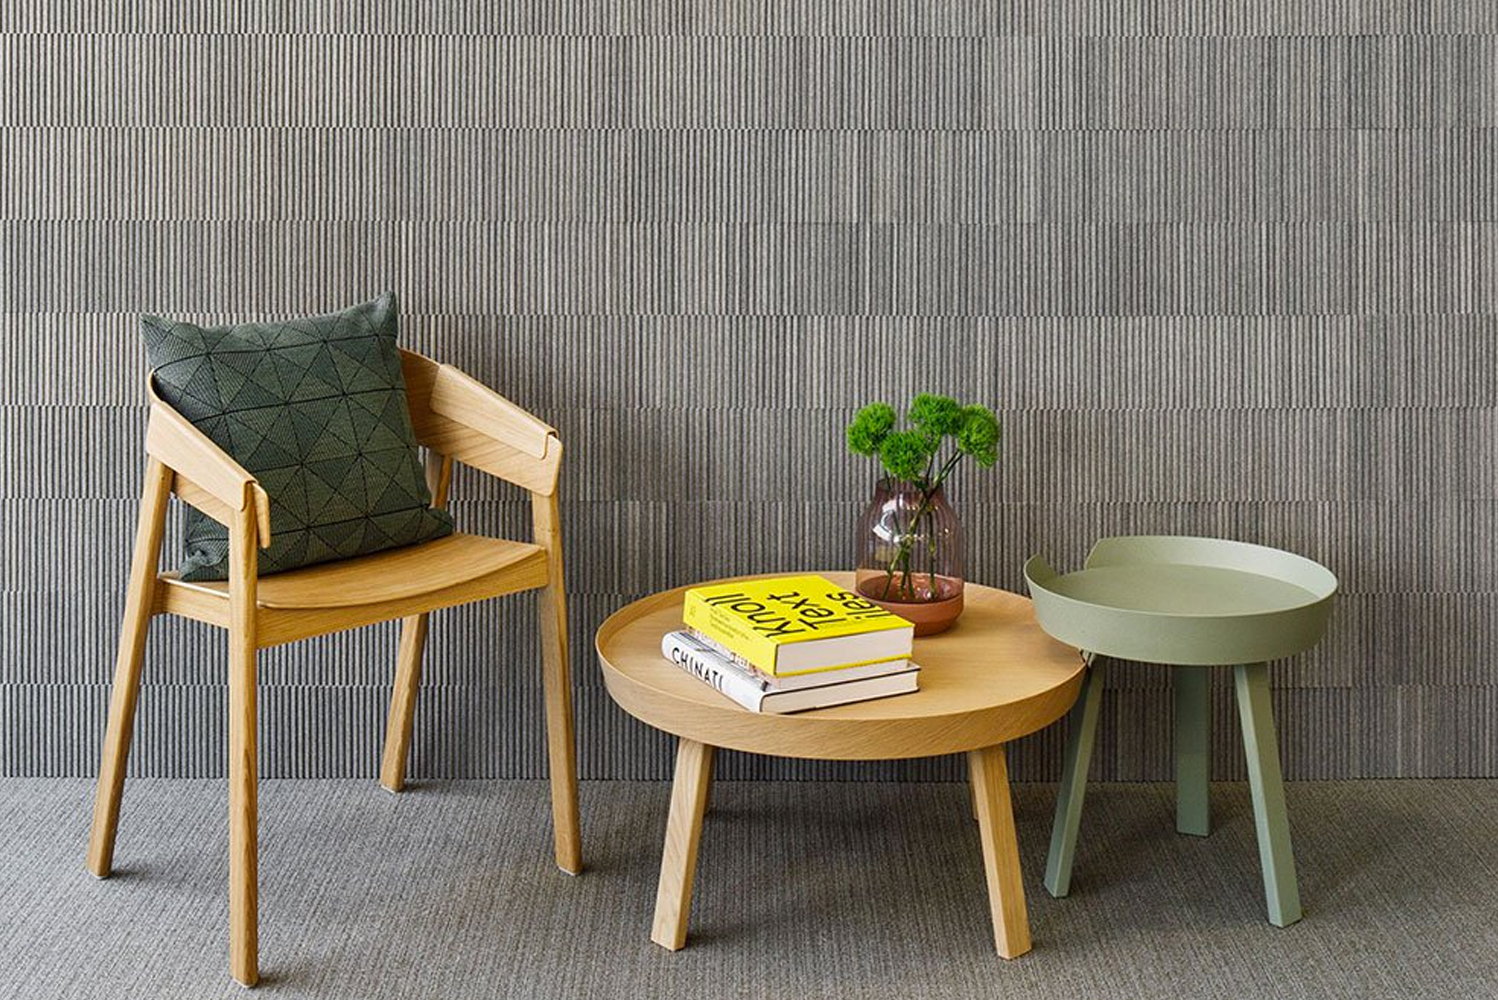 FilzFelt launched Ribsy an acoustic tile-based system for wall-to-wall installations 